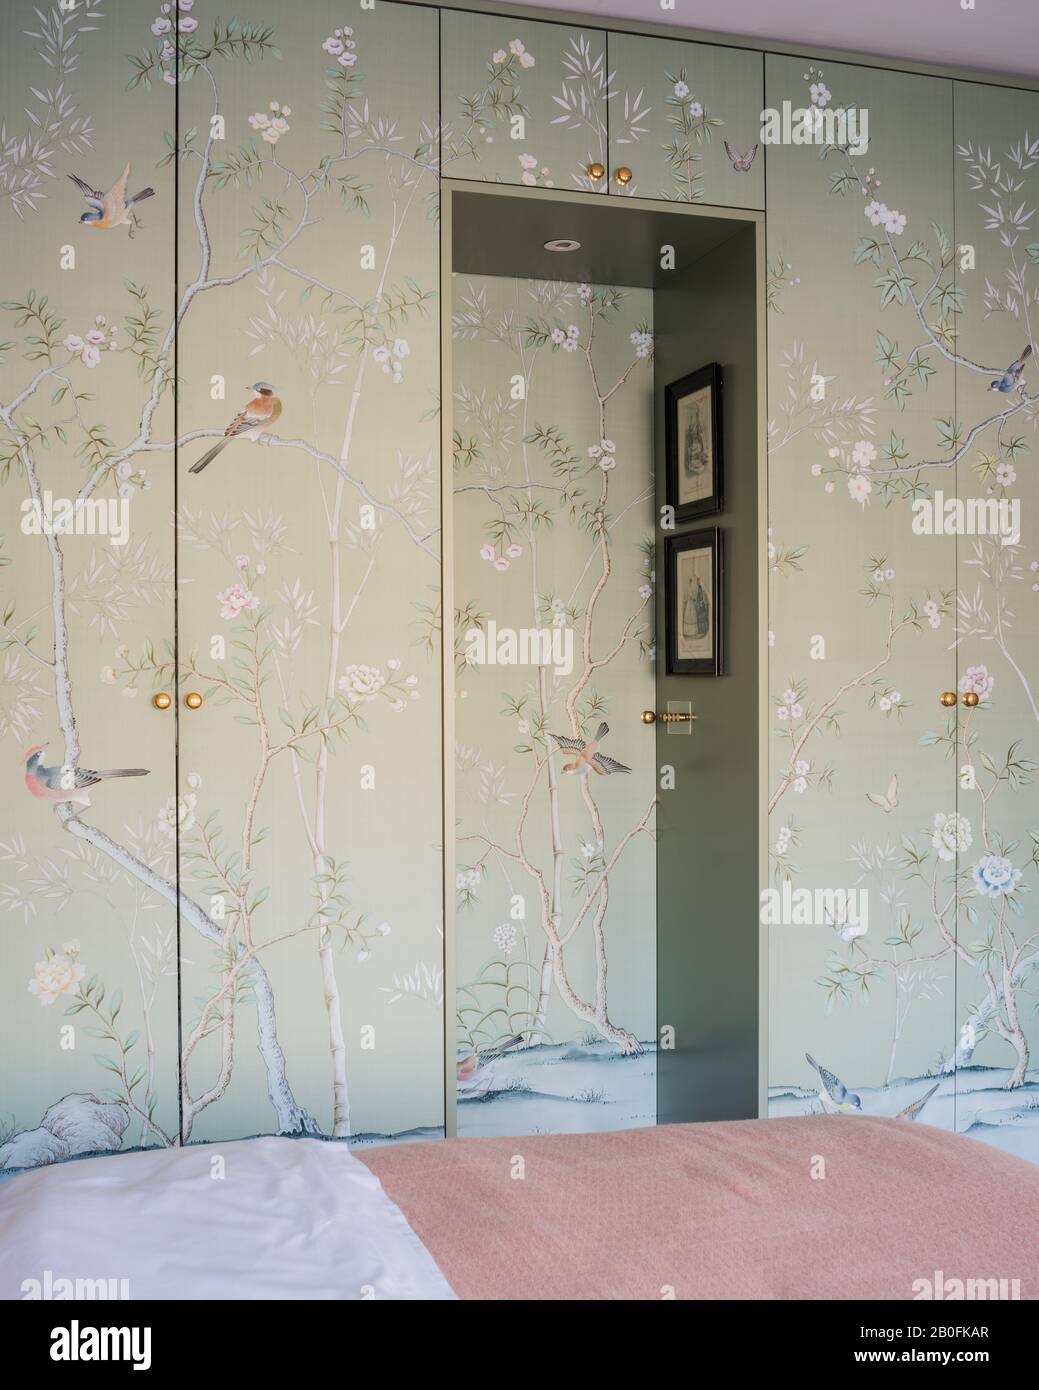 Chinoiserie wall paper covering wardrobe doors. Stock Photo